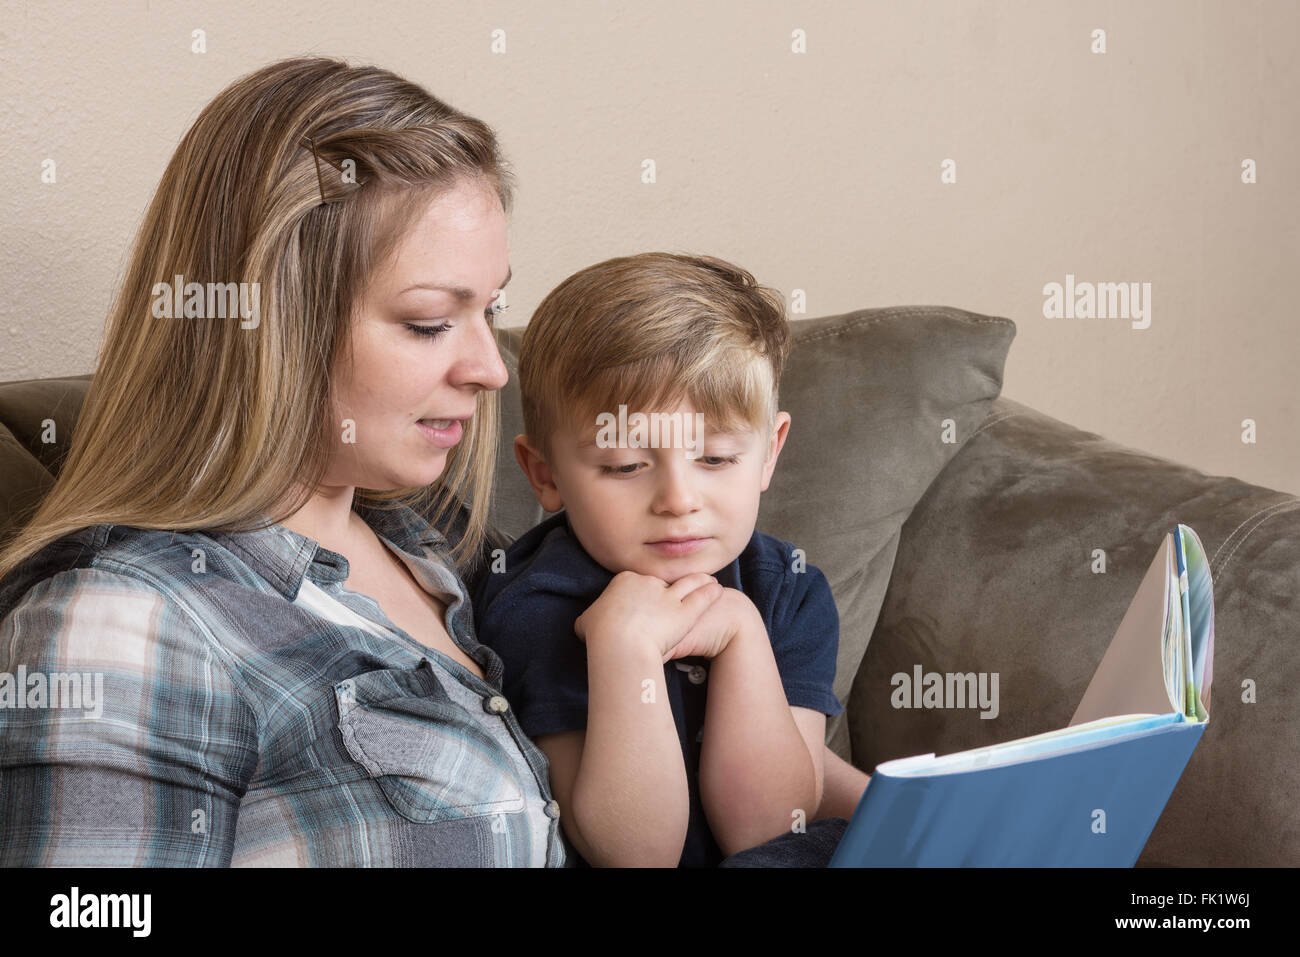 A young boy listens attentively as his mother reads to him. Stock Photo